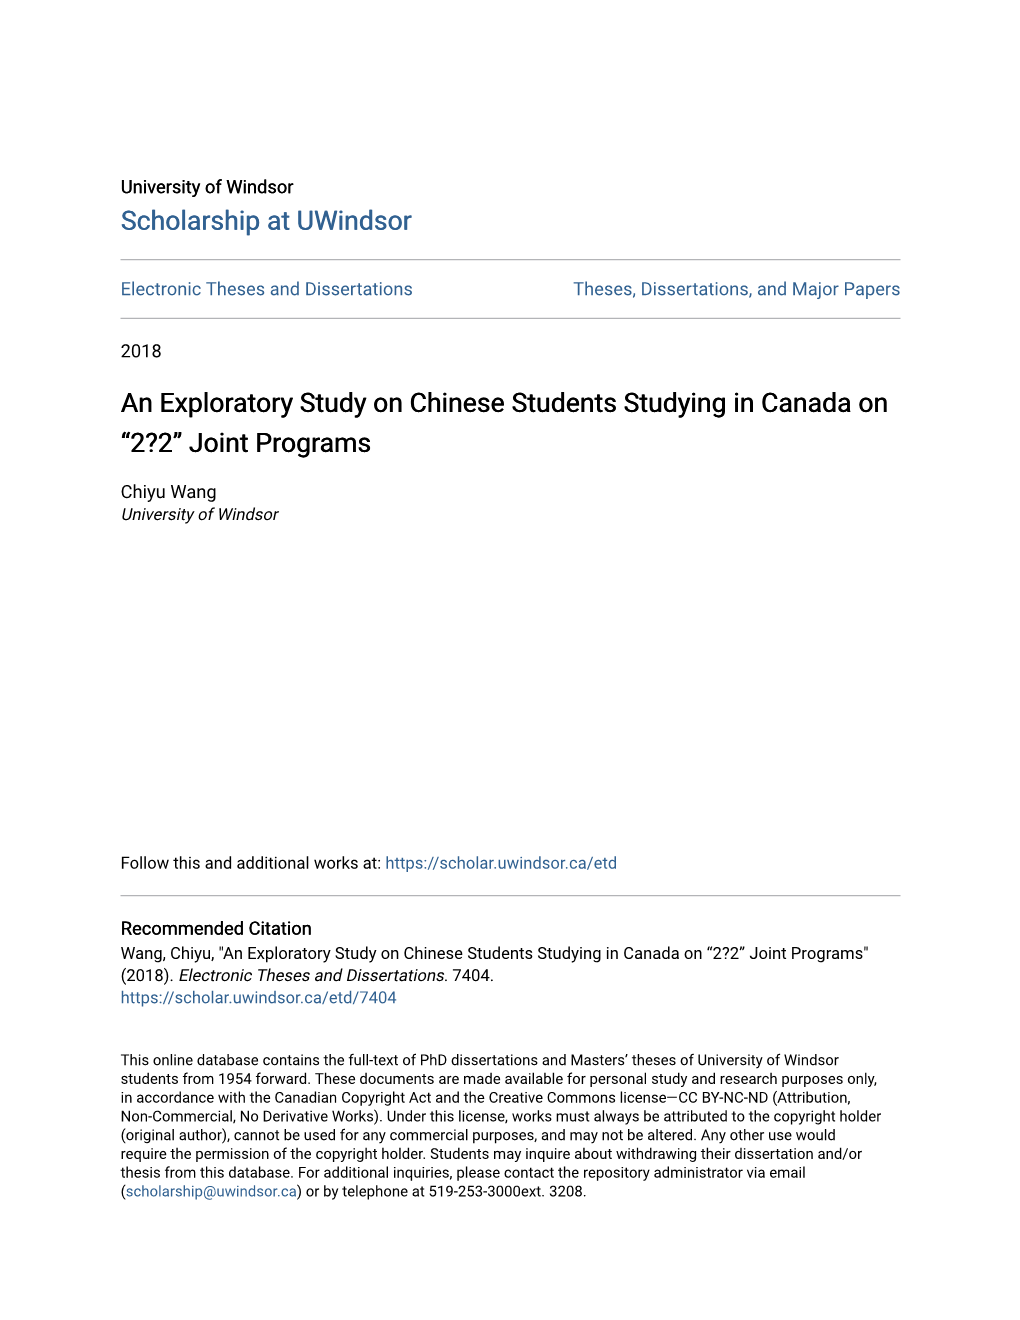 An Exploratory Study on Chinese Students Studying in Canada on “2?2” Joint Programs